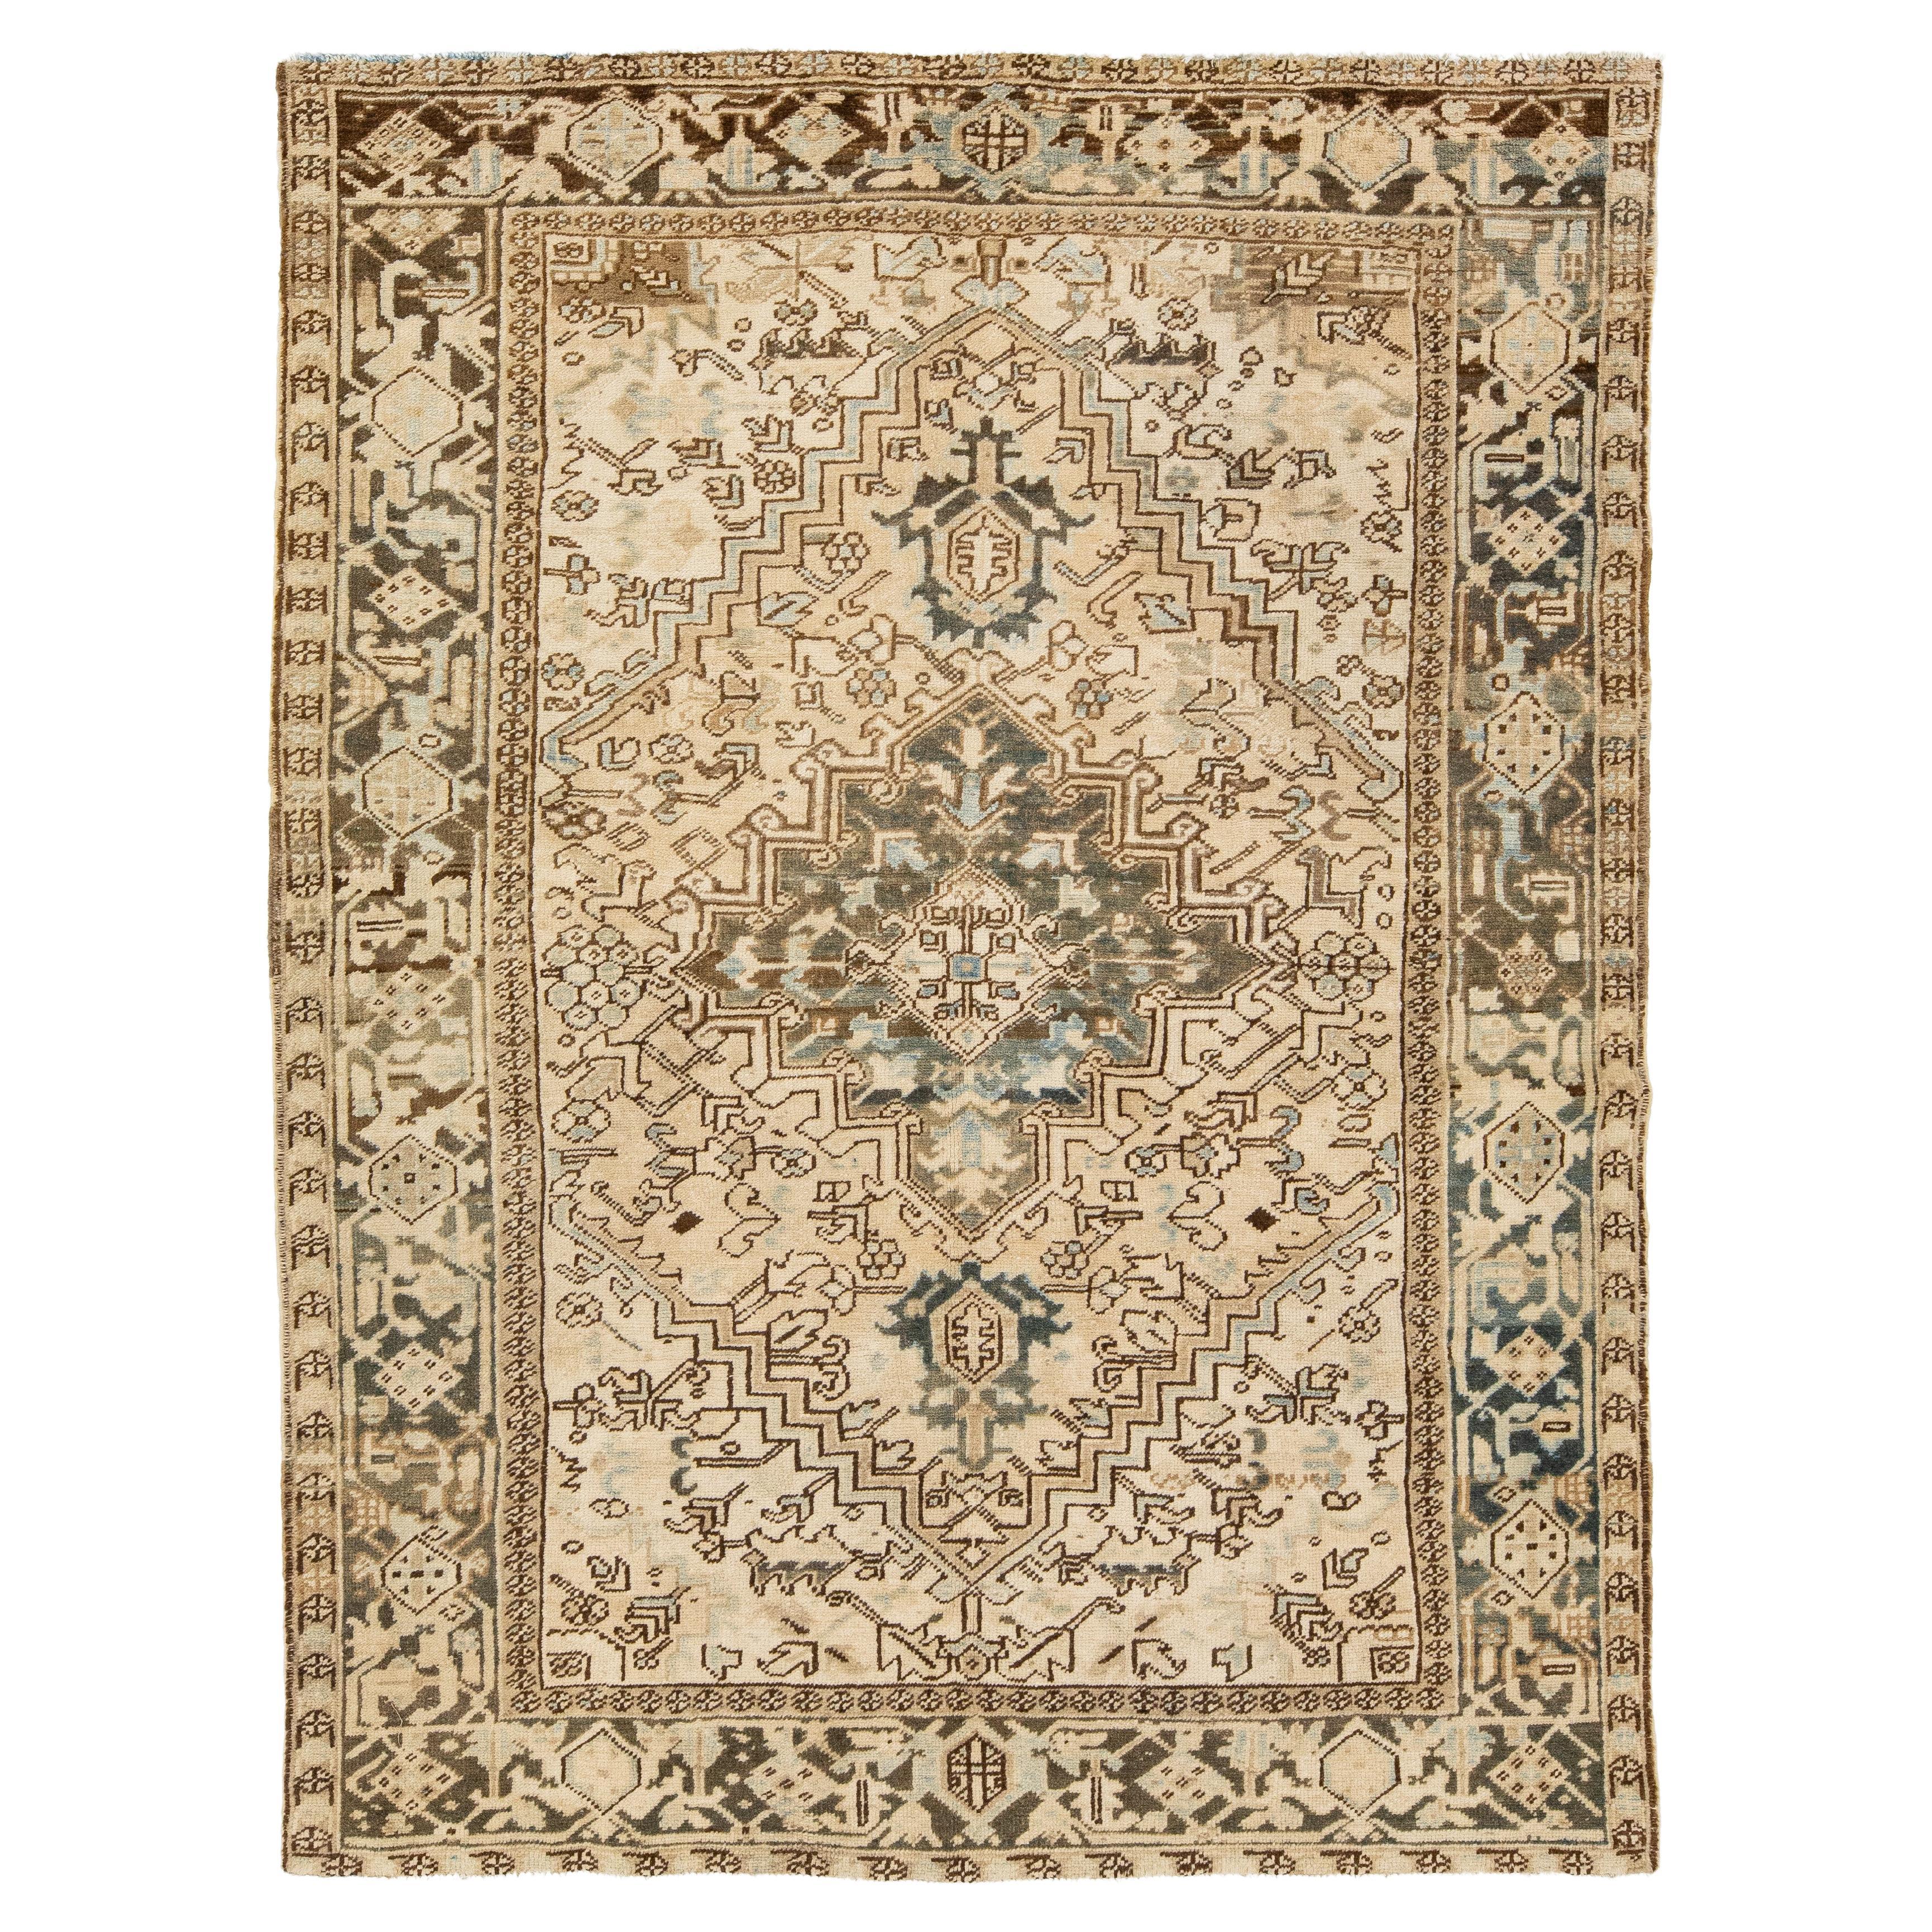 1920s Persian Antique Wool Rug In Beige with Medallion Design 